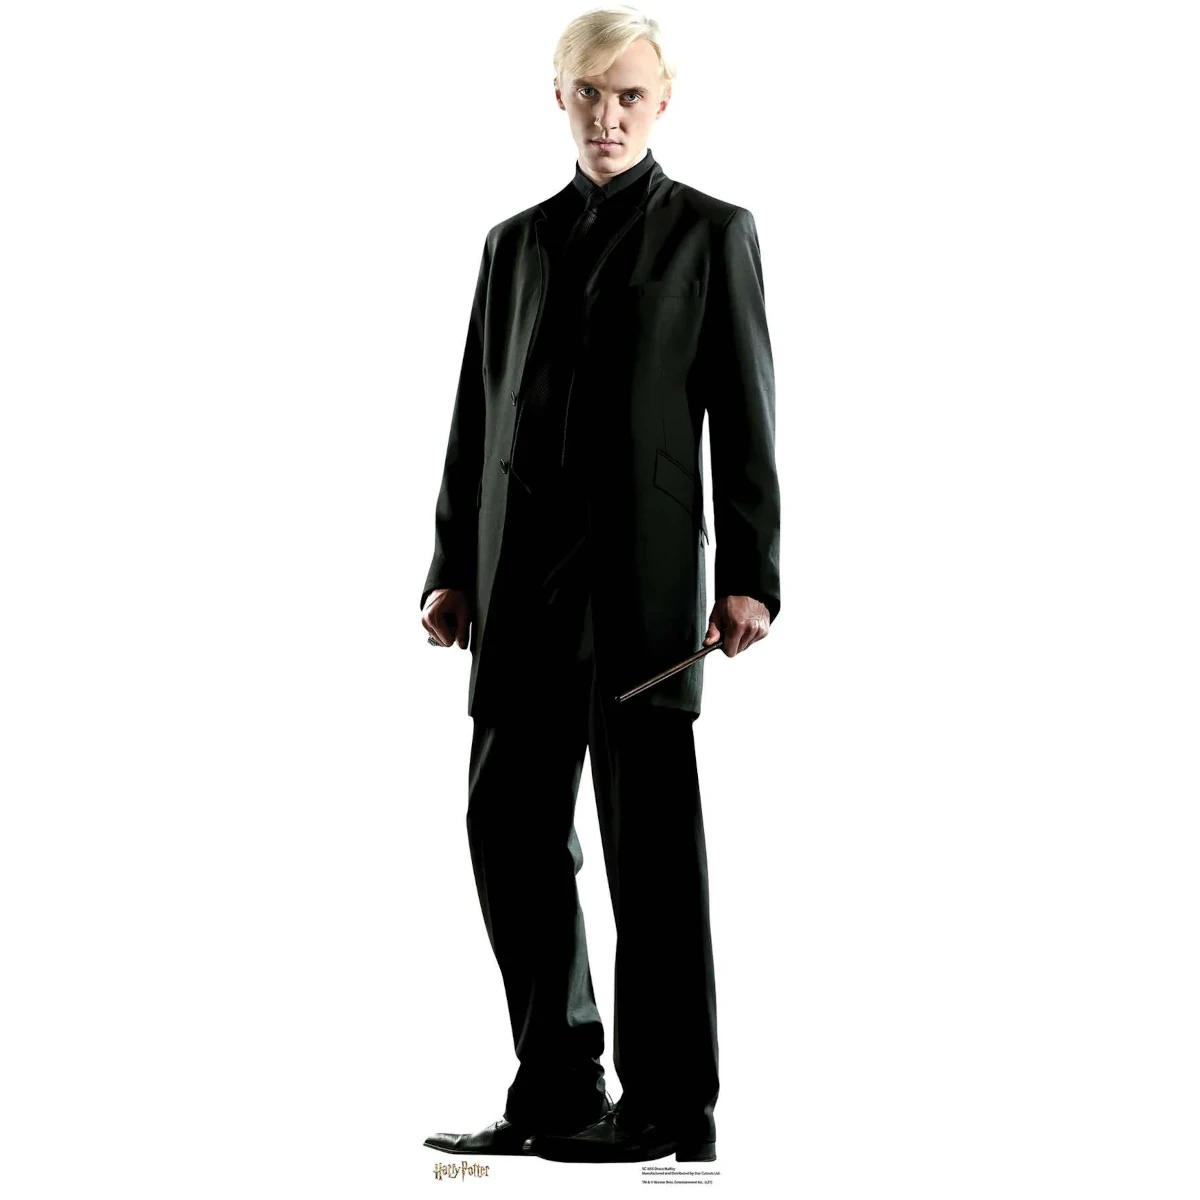 SC1655 Draco Malfoy (Harry Potter) Official Mini Cardboard Cutout Standee Front